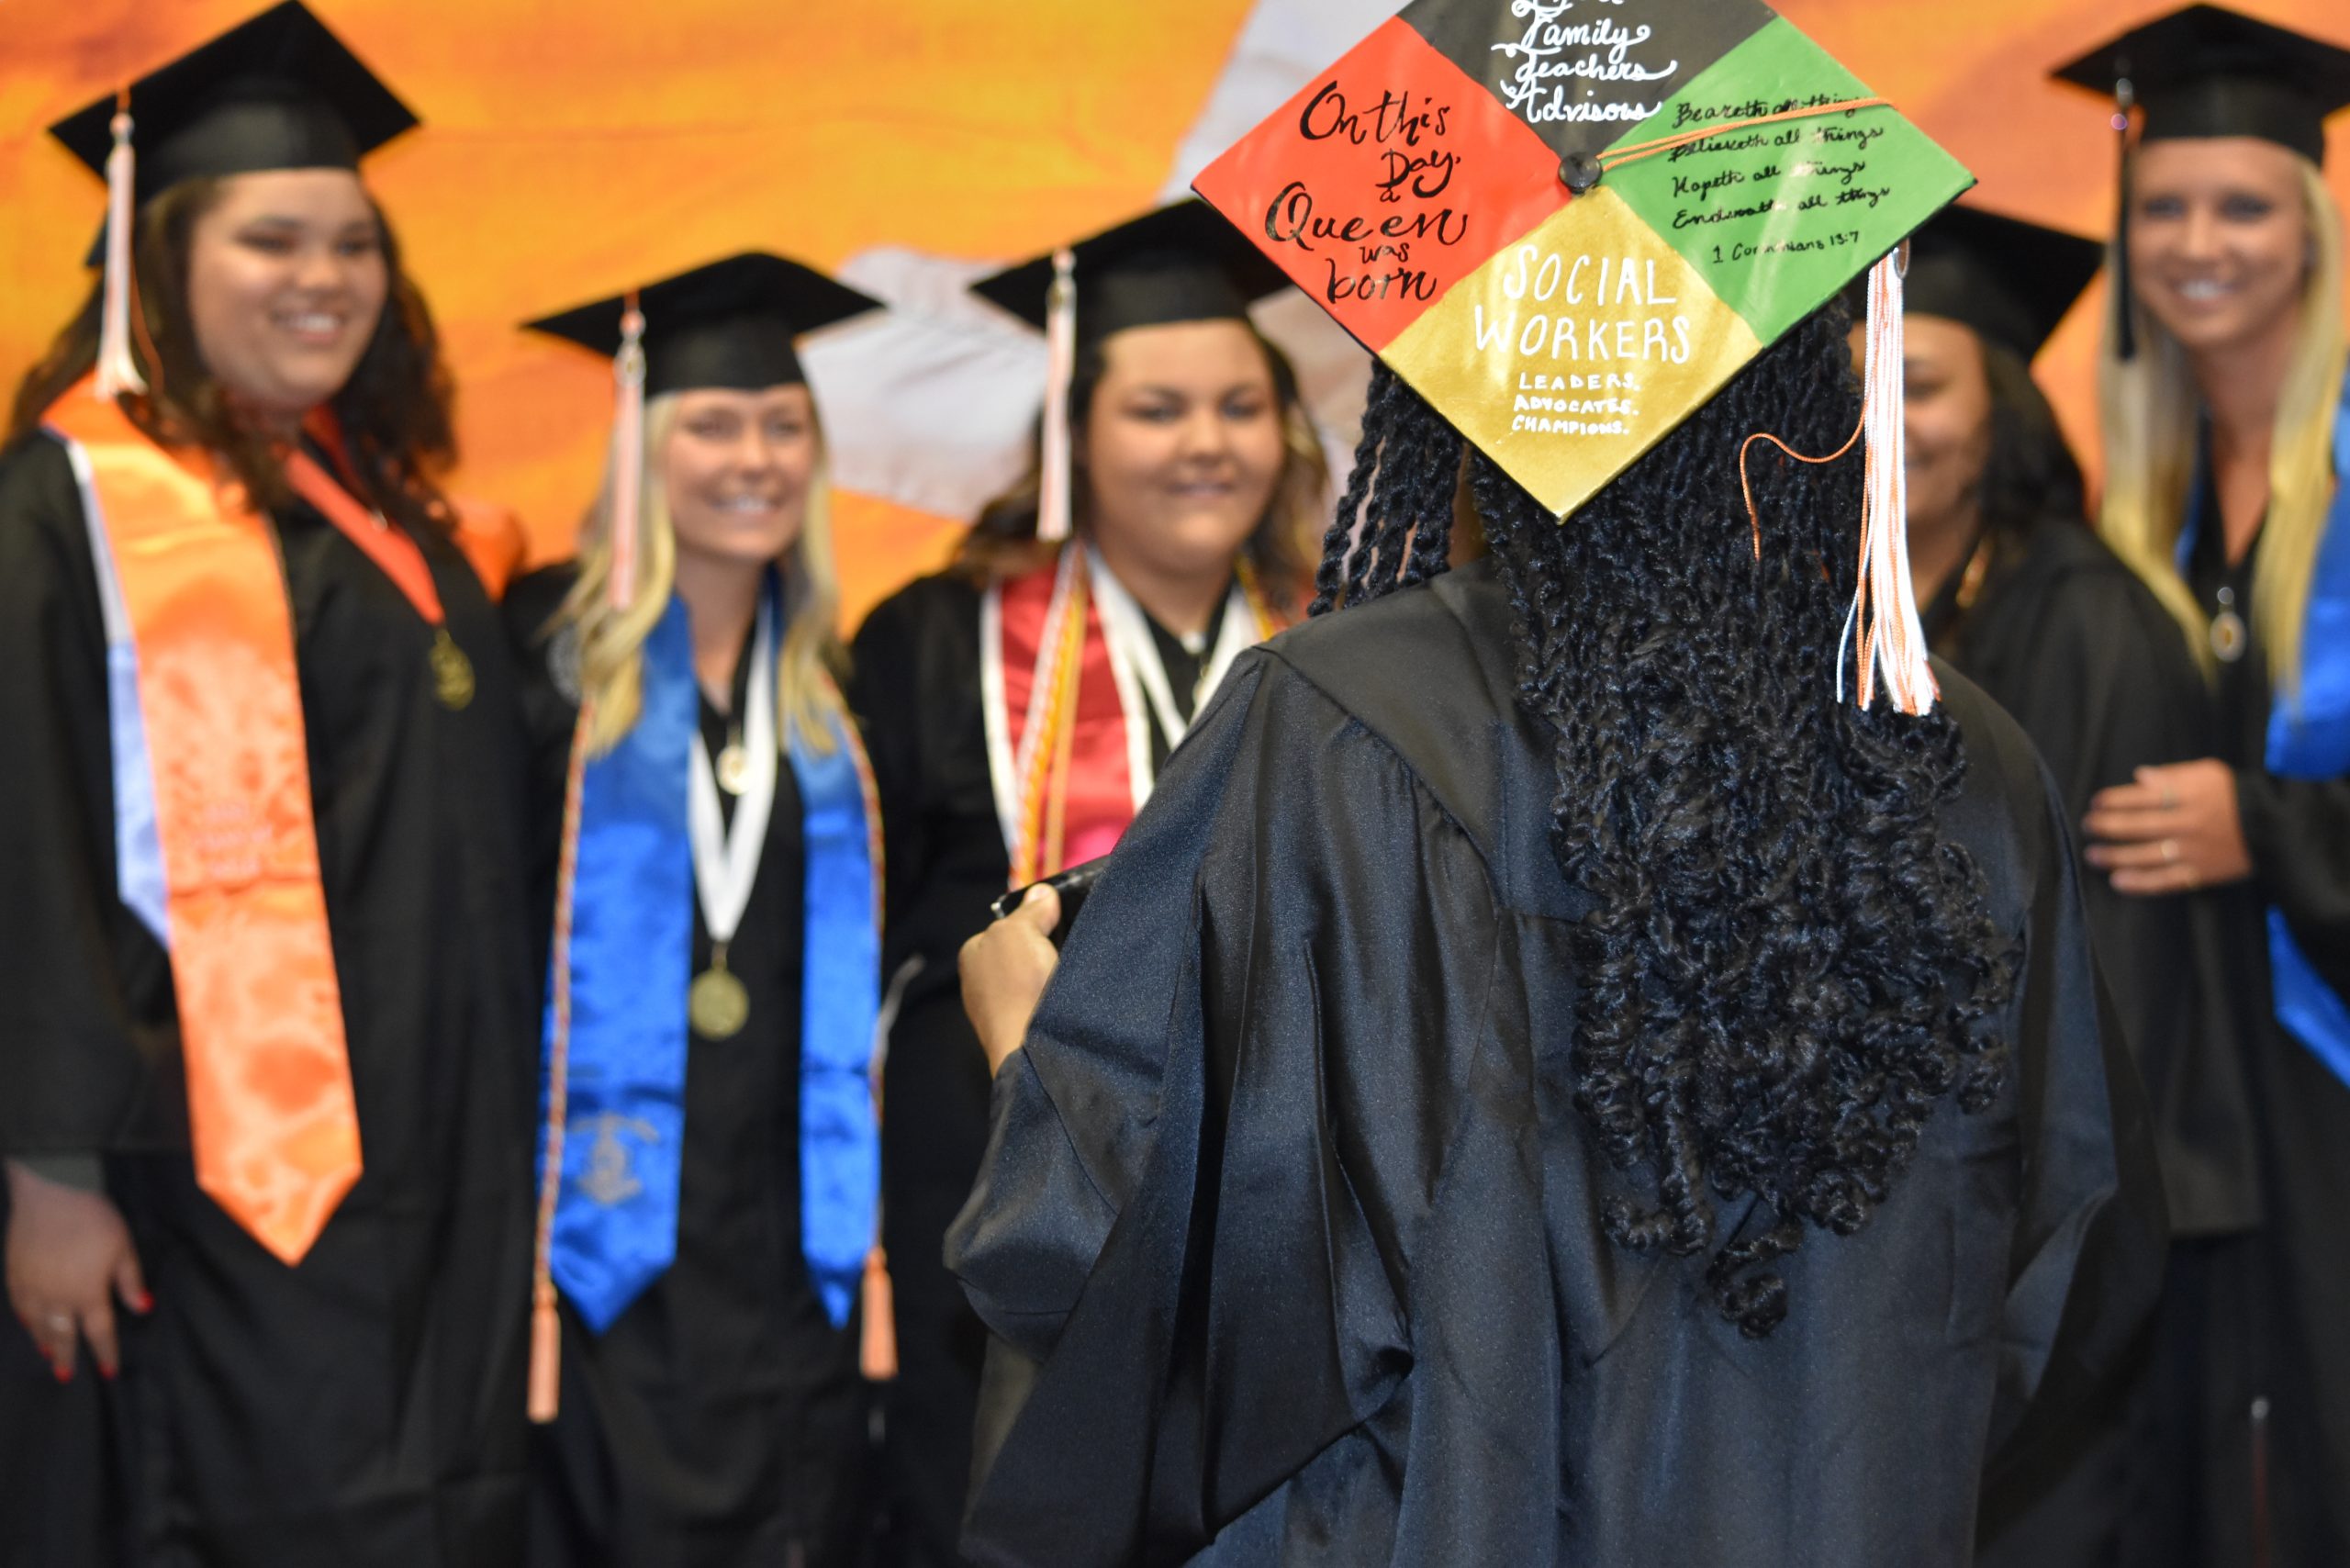 college graduates wearing caps and gowns standing in front of an orange wall